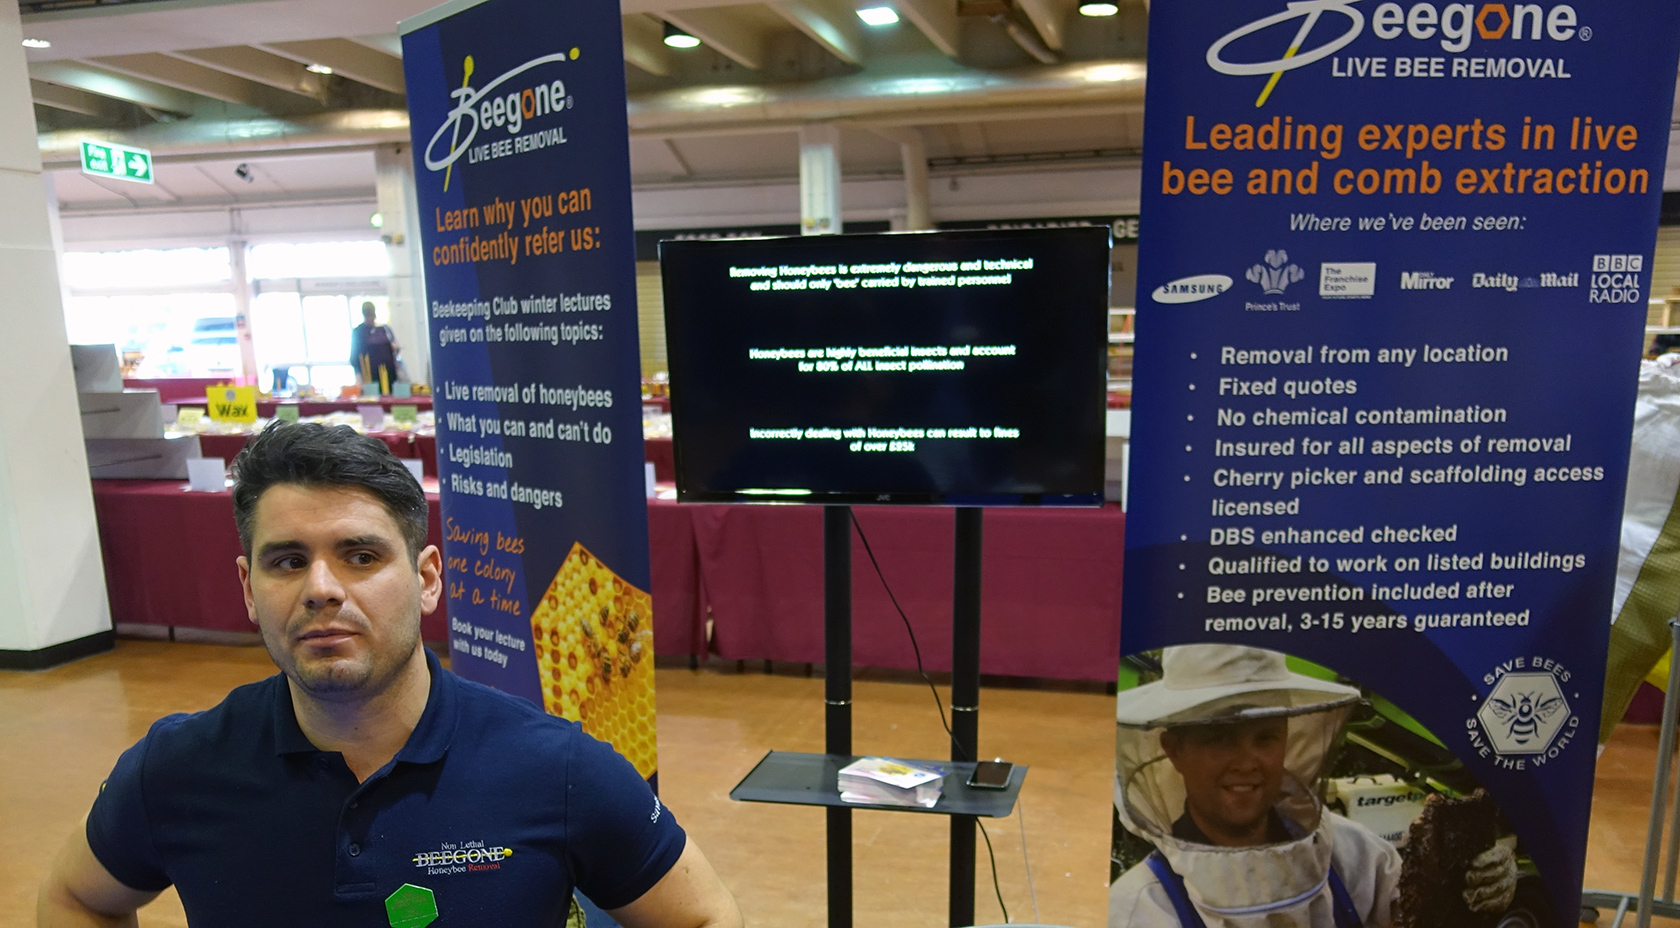 BeeGone at the 2018 National Honey Show